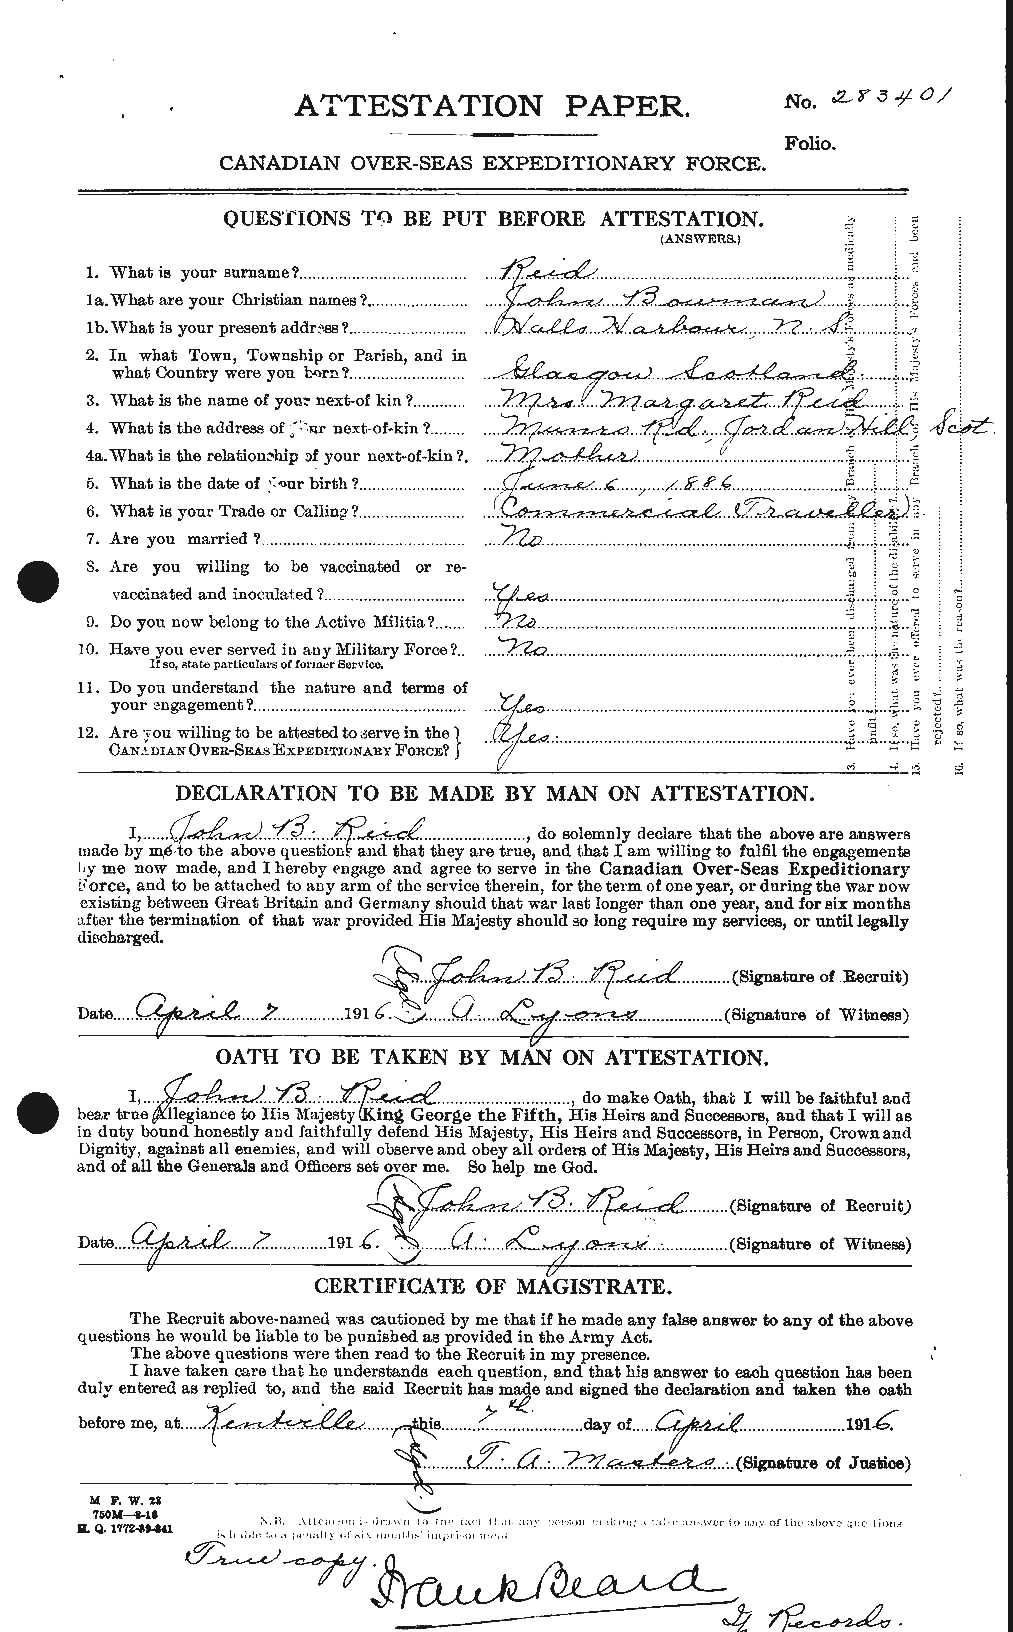 Personnel Records of the First World War - CEF 598822a